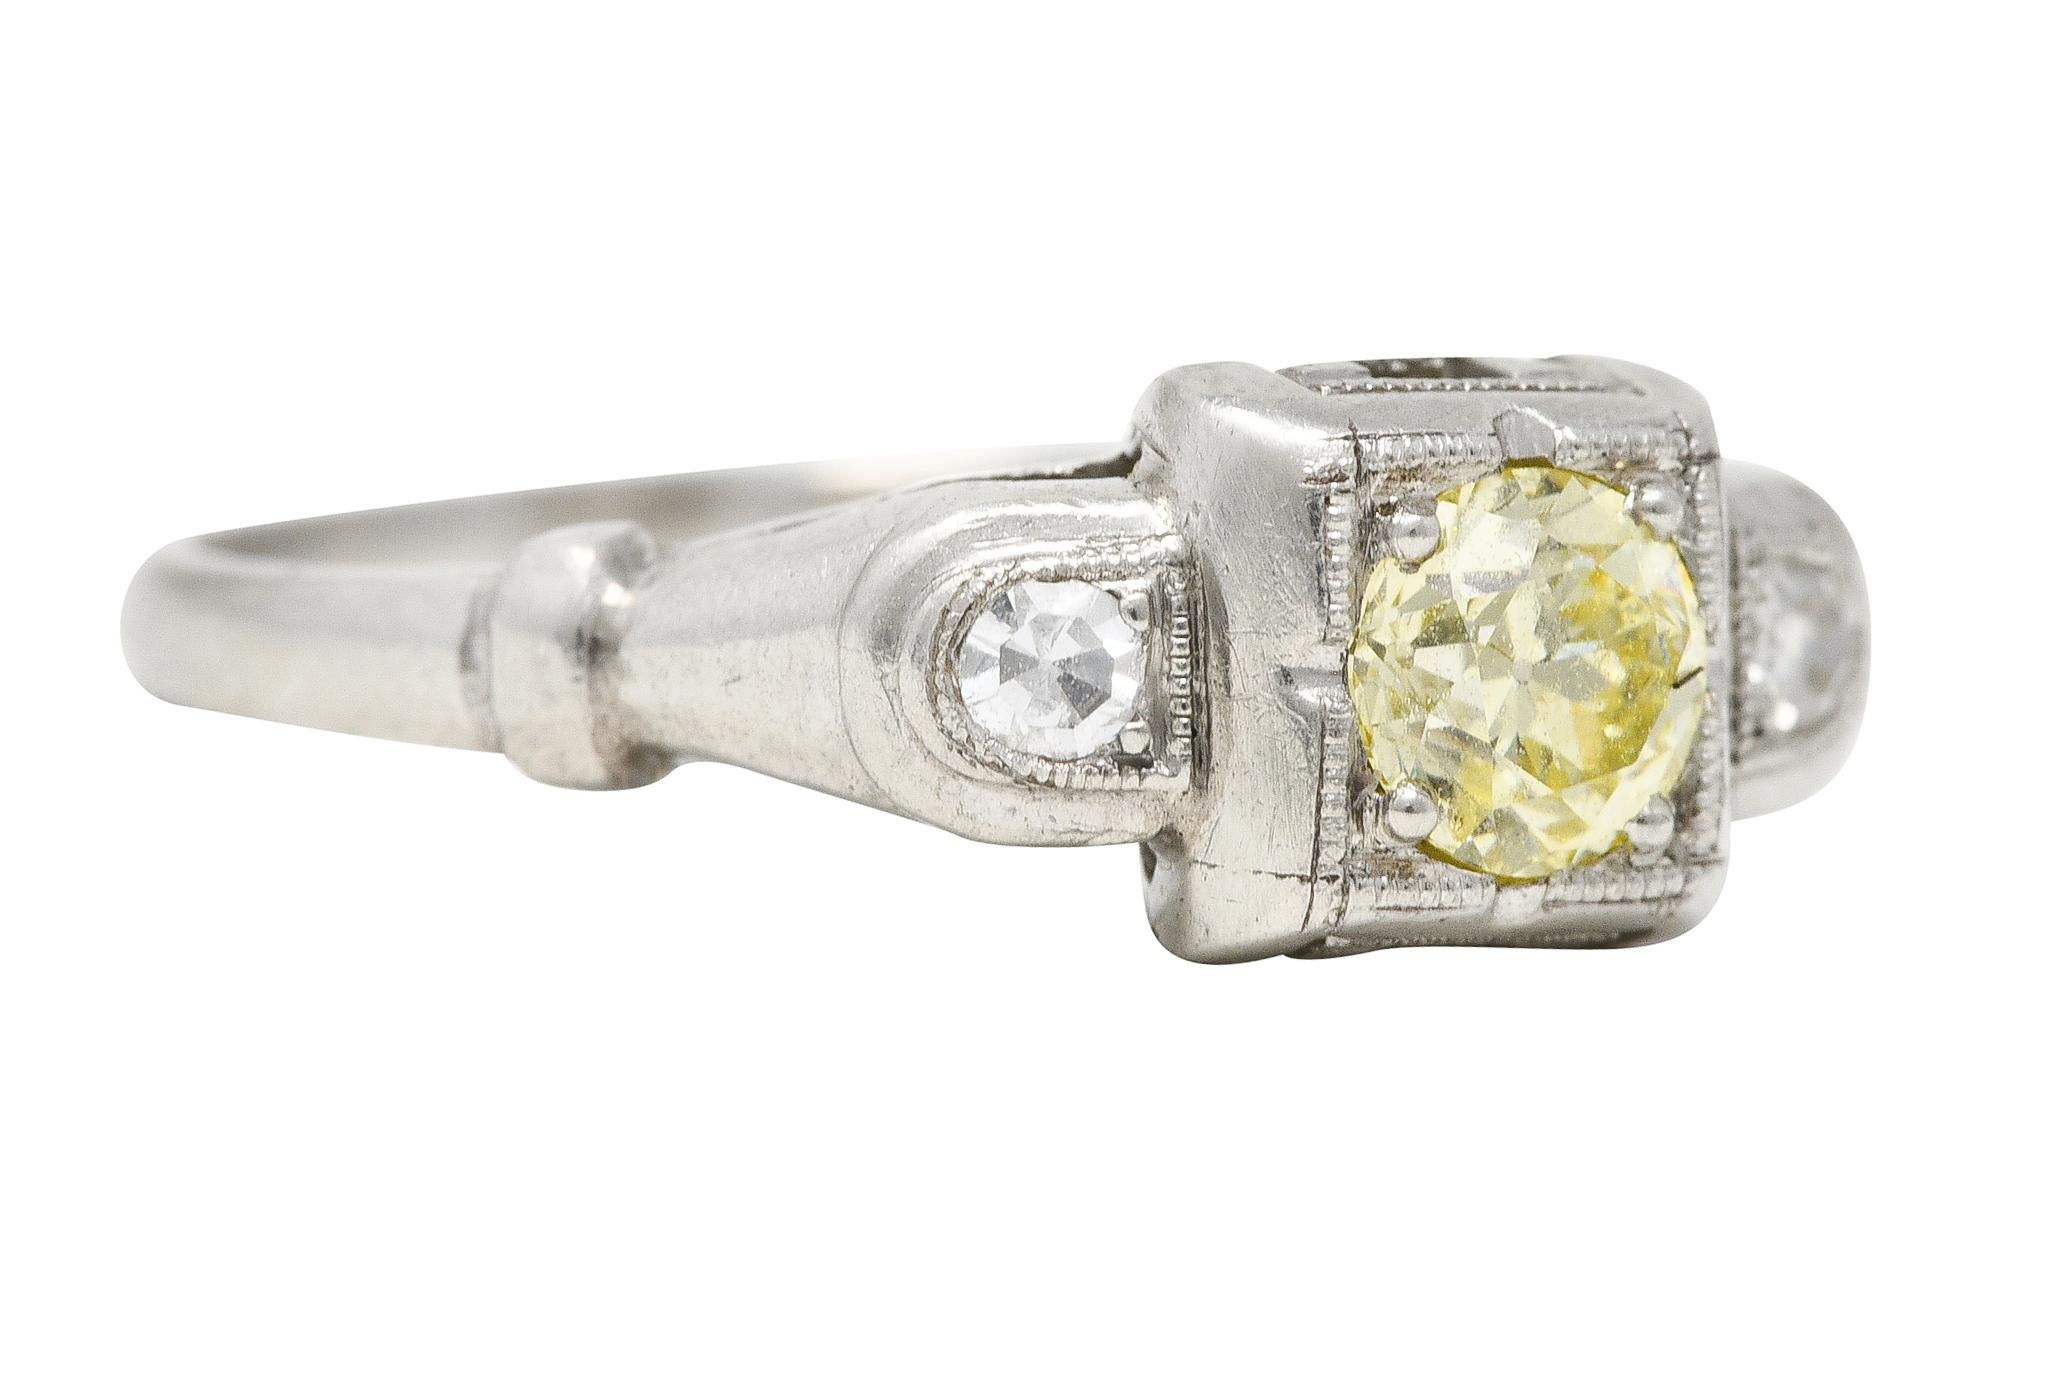 Featuring a fancy colored old European cut diamond weighing approximately 0.30 carat. Fancy light yellow in color with SI1 clarity. Set low in a square form head and flanked by half moon formed cathedral shoulders. Accented by single cut diamonds